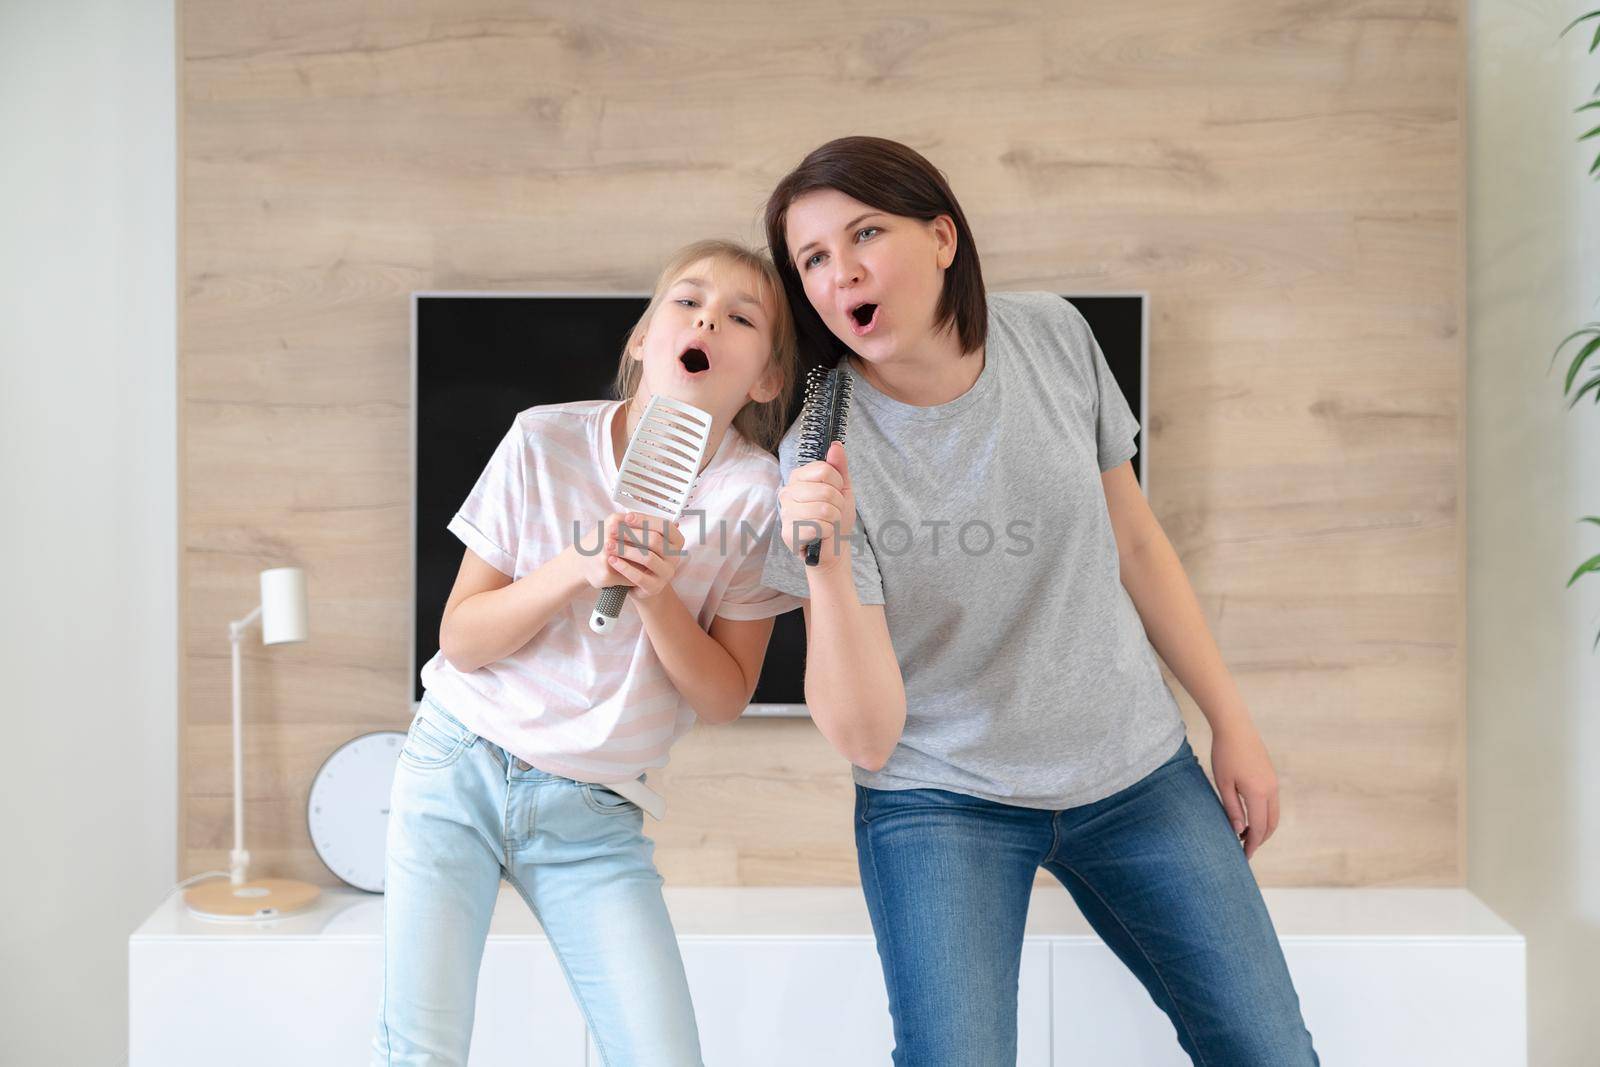 Happy family young adult mother and cute teen daughter having fun singing karaoke song in hairbrushes. mother laughing enjoying funny lifestyle activity with teenage girl at home together. by Mariakray